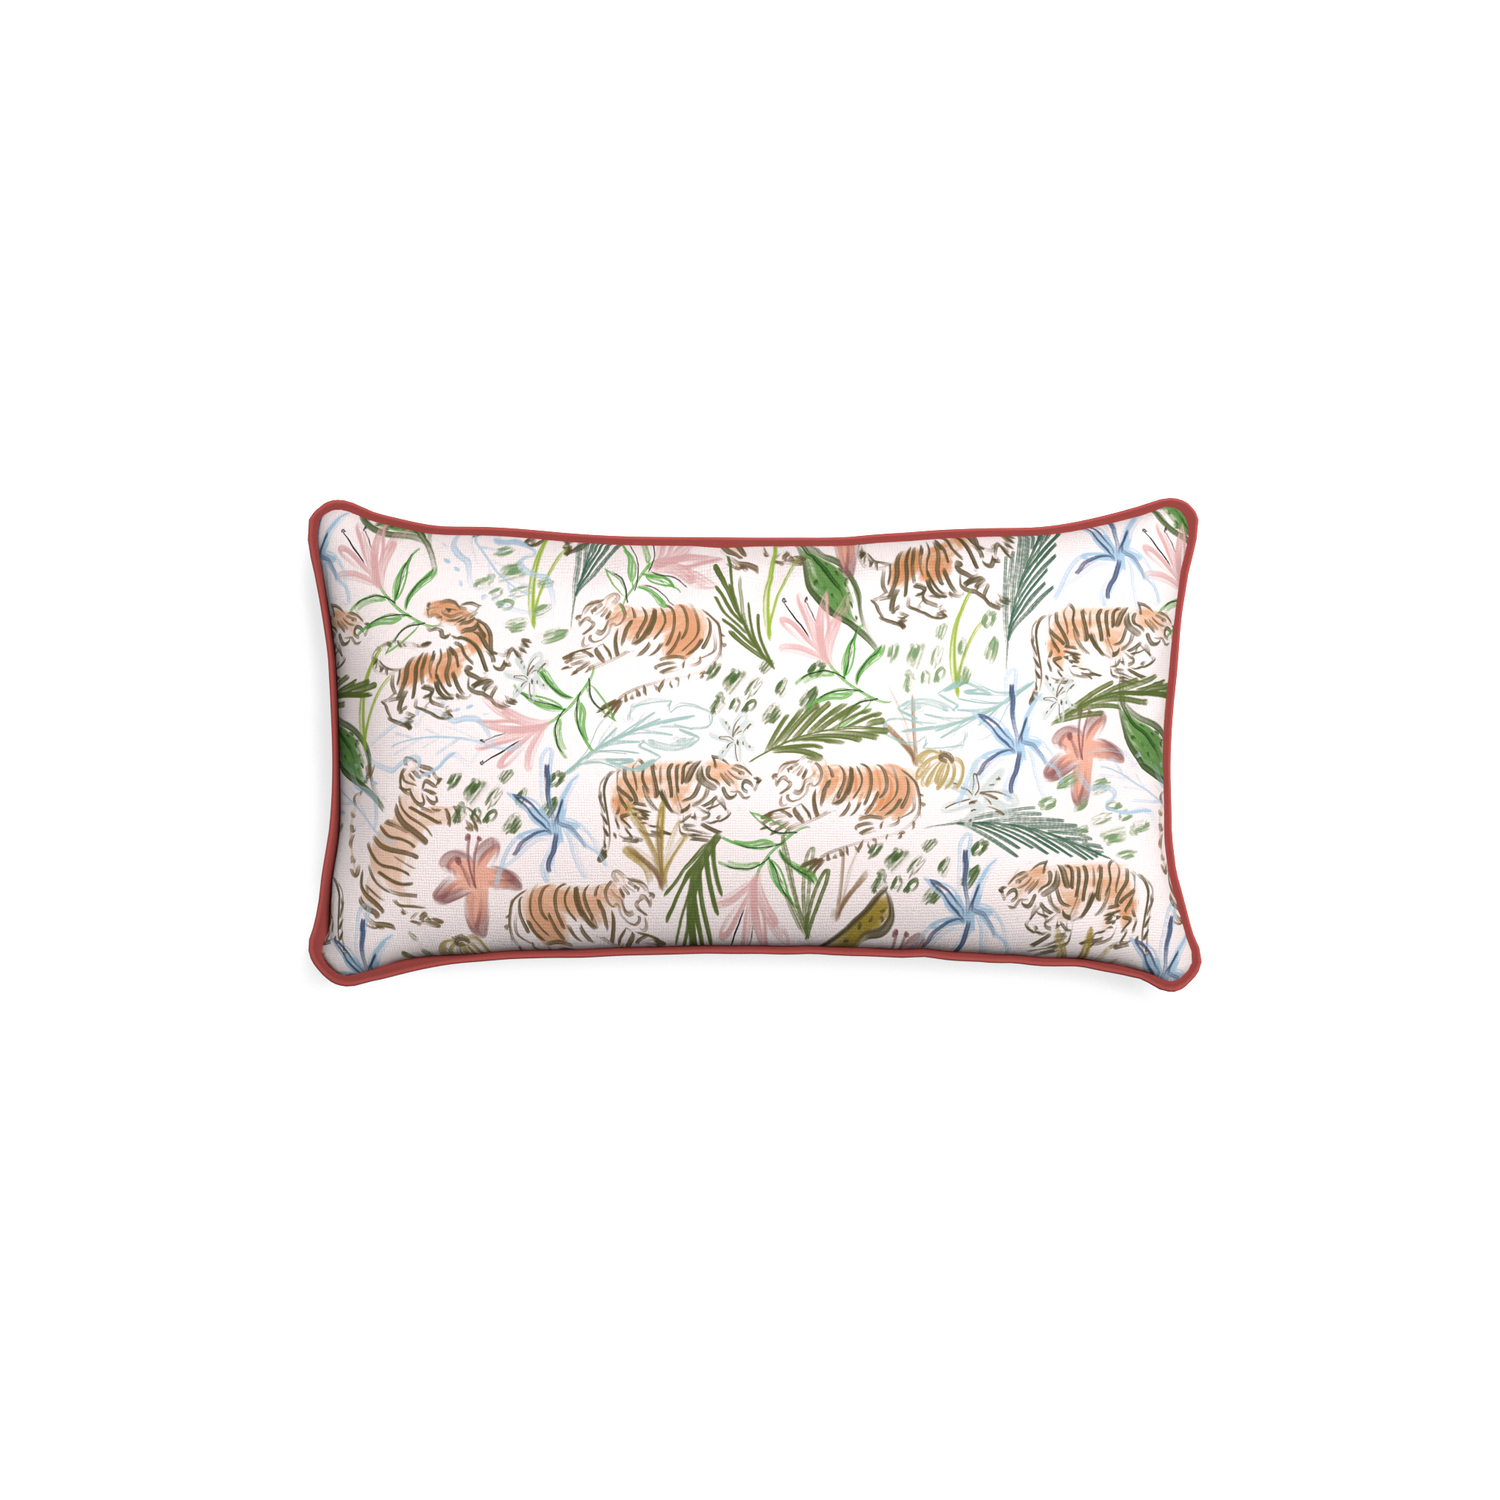 Petite-lumbar frida pink custom pink chinoiserie tigerpillow with c piping on white background